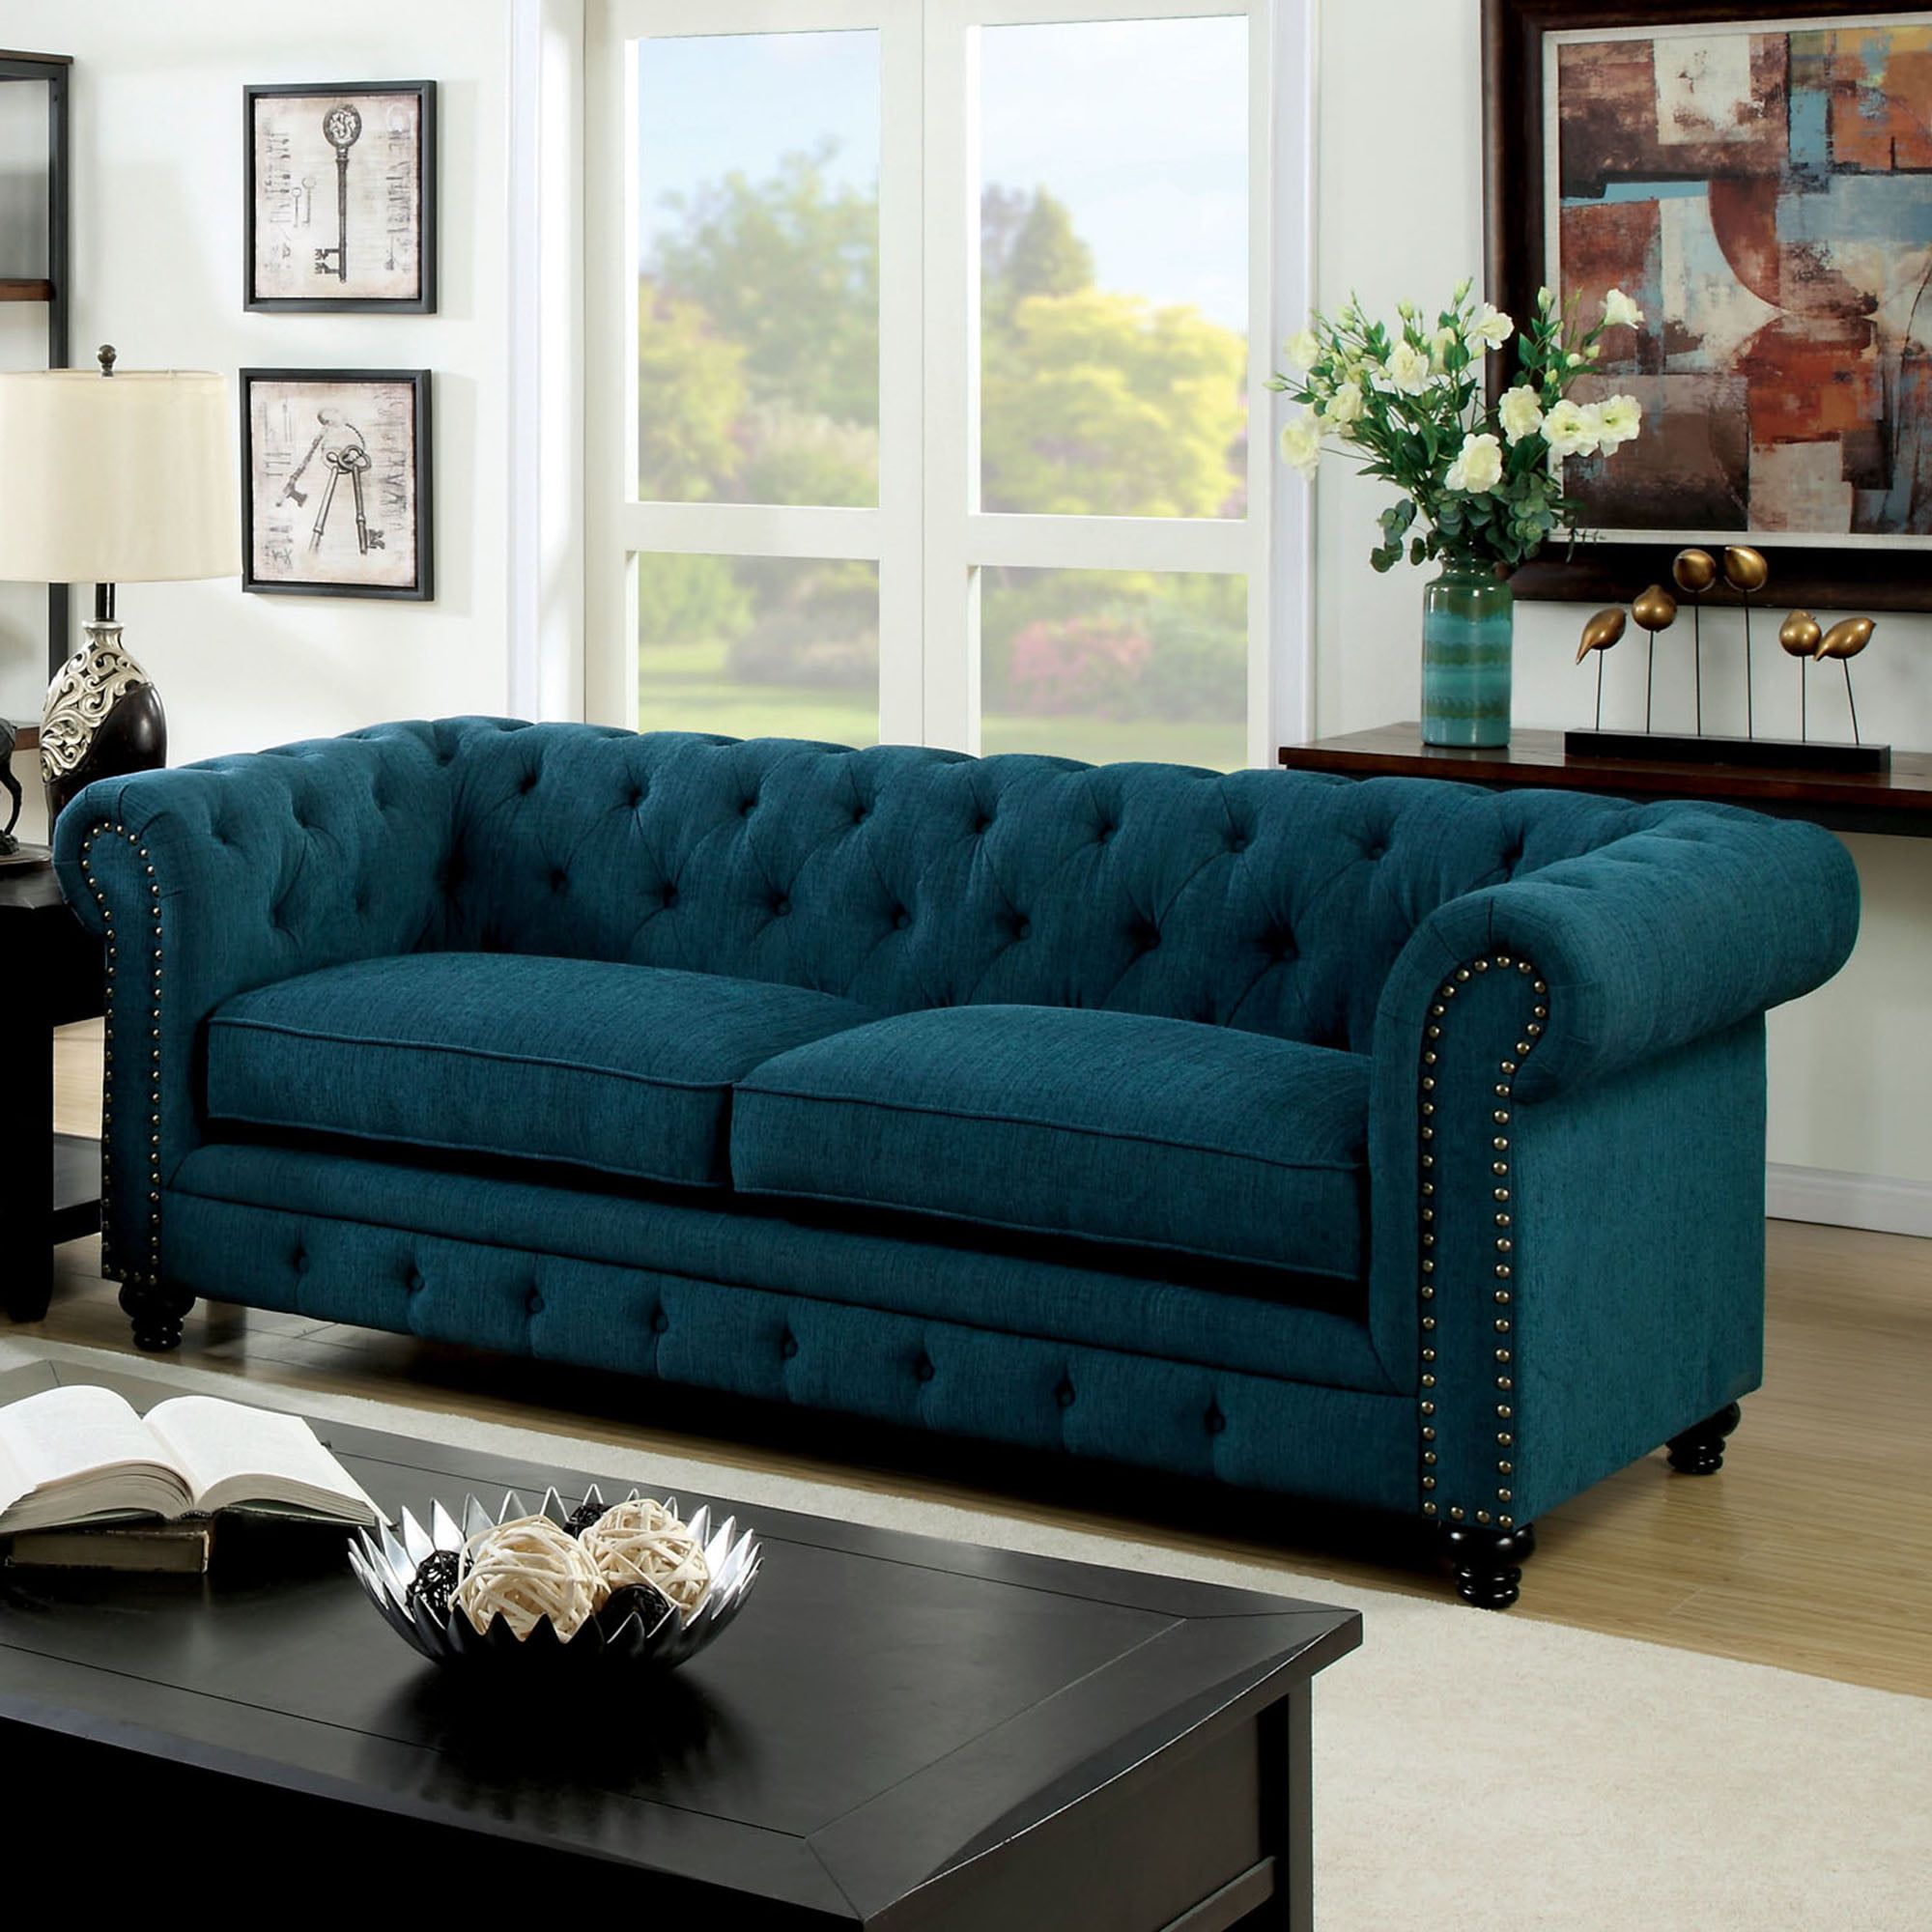 Furniture Of America Tufted Glam Faux Leather Nyssa Tuxedo Sofa, Dark Within Tufted Upholstered Sofas (Gallery 16 of 20)